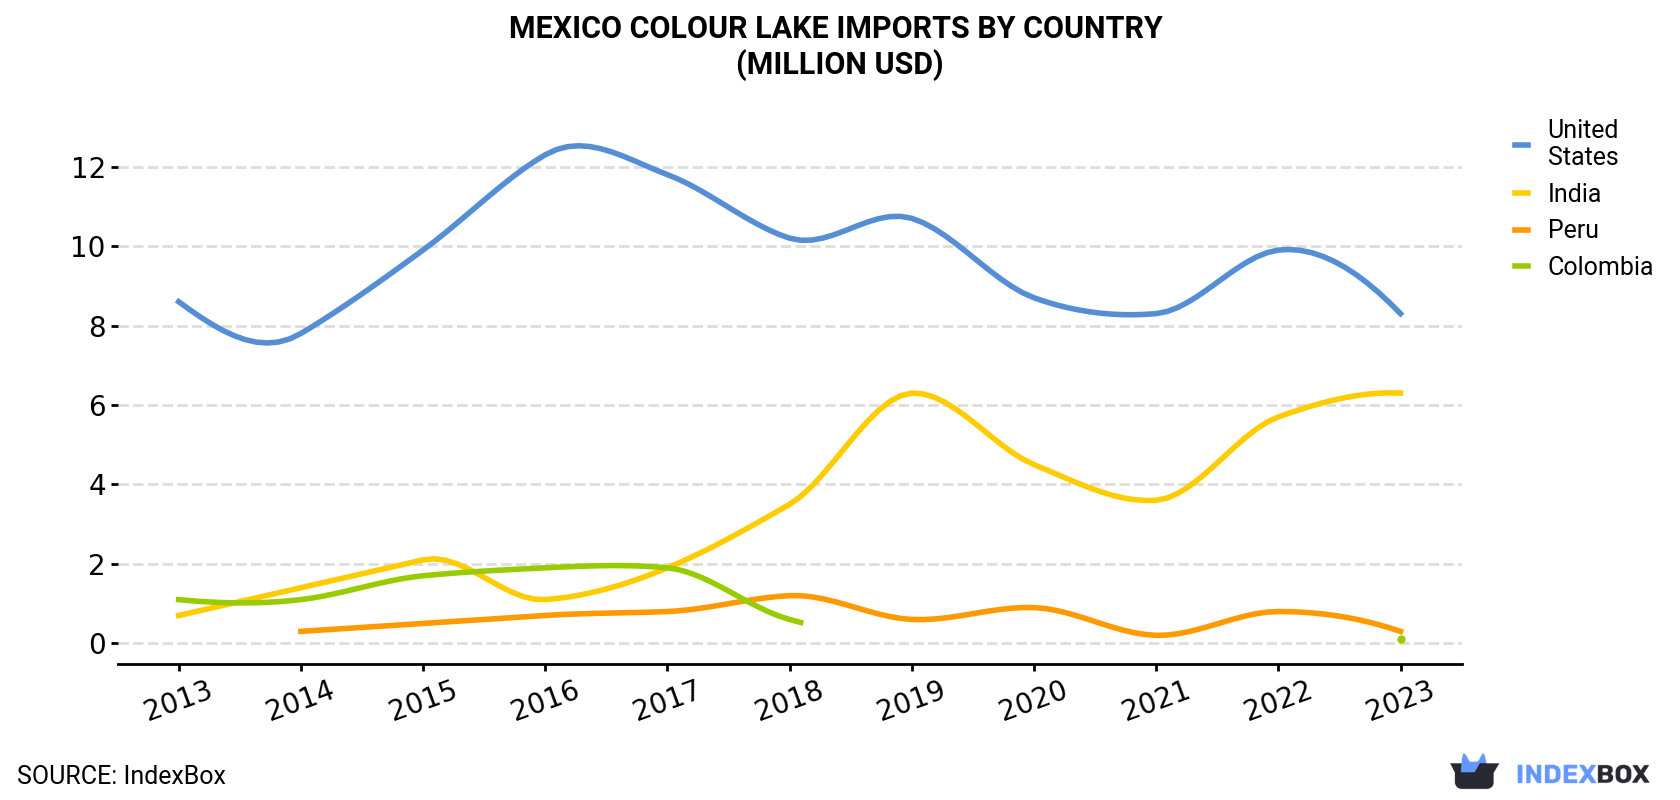 Mexico Colour Lake Imports By Country (Million USD)